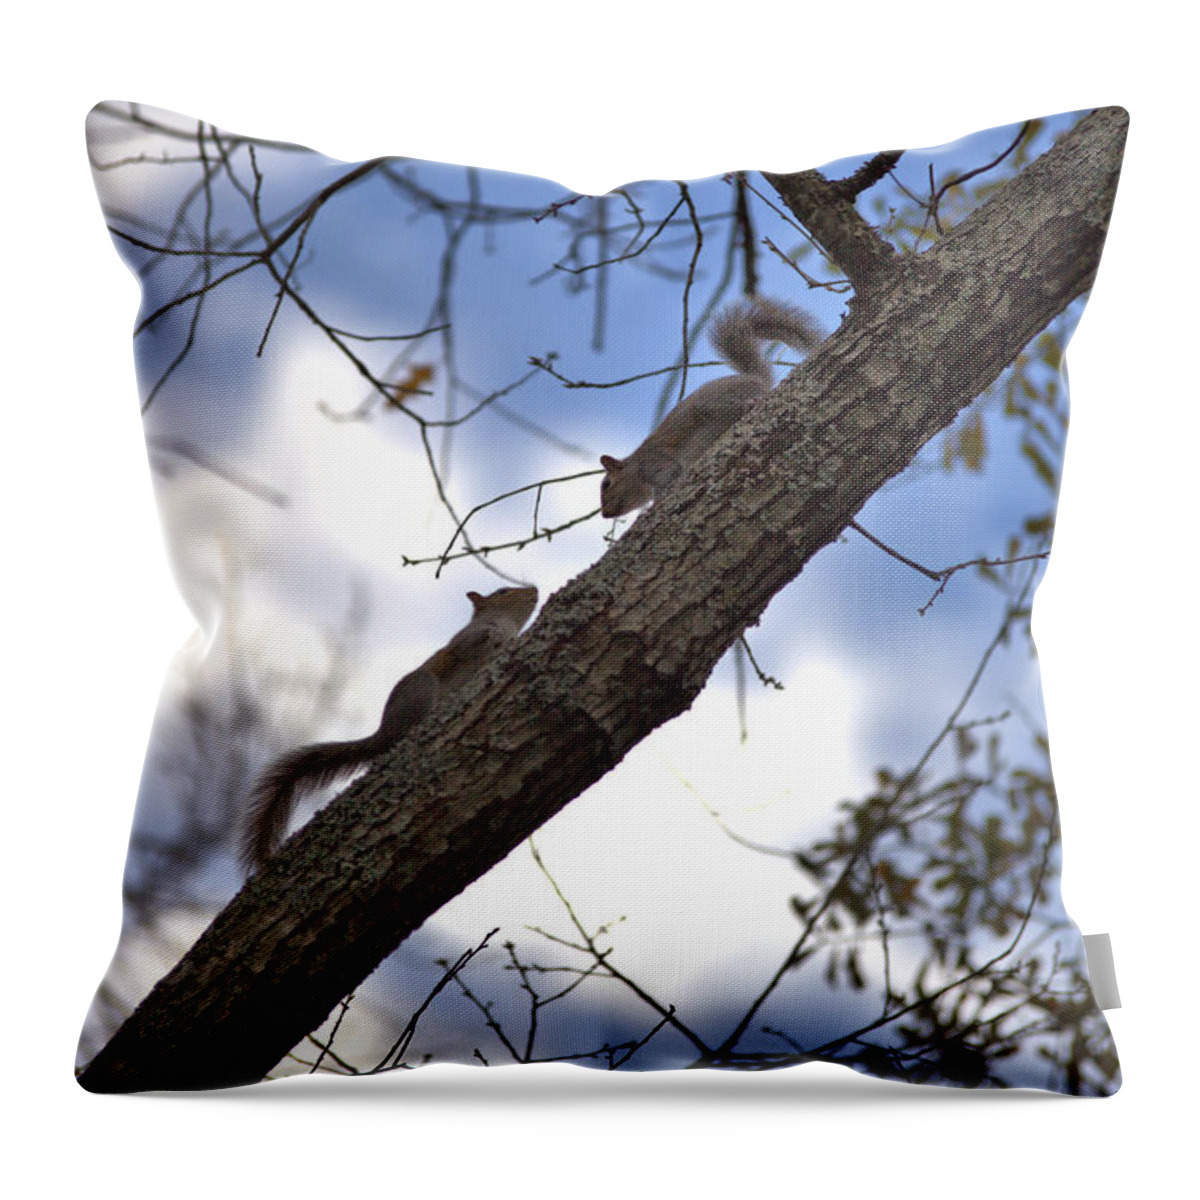 7644 Throw Pillow featuring the photograph Now What? by Gordon Elwell